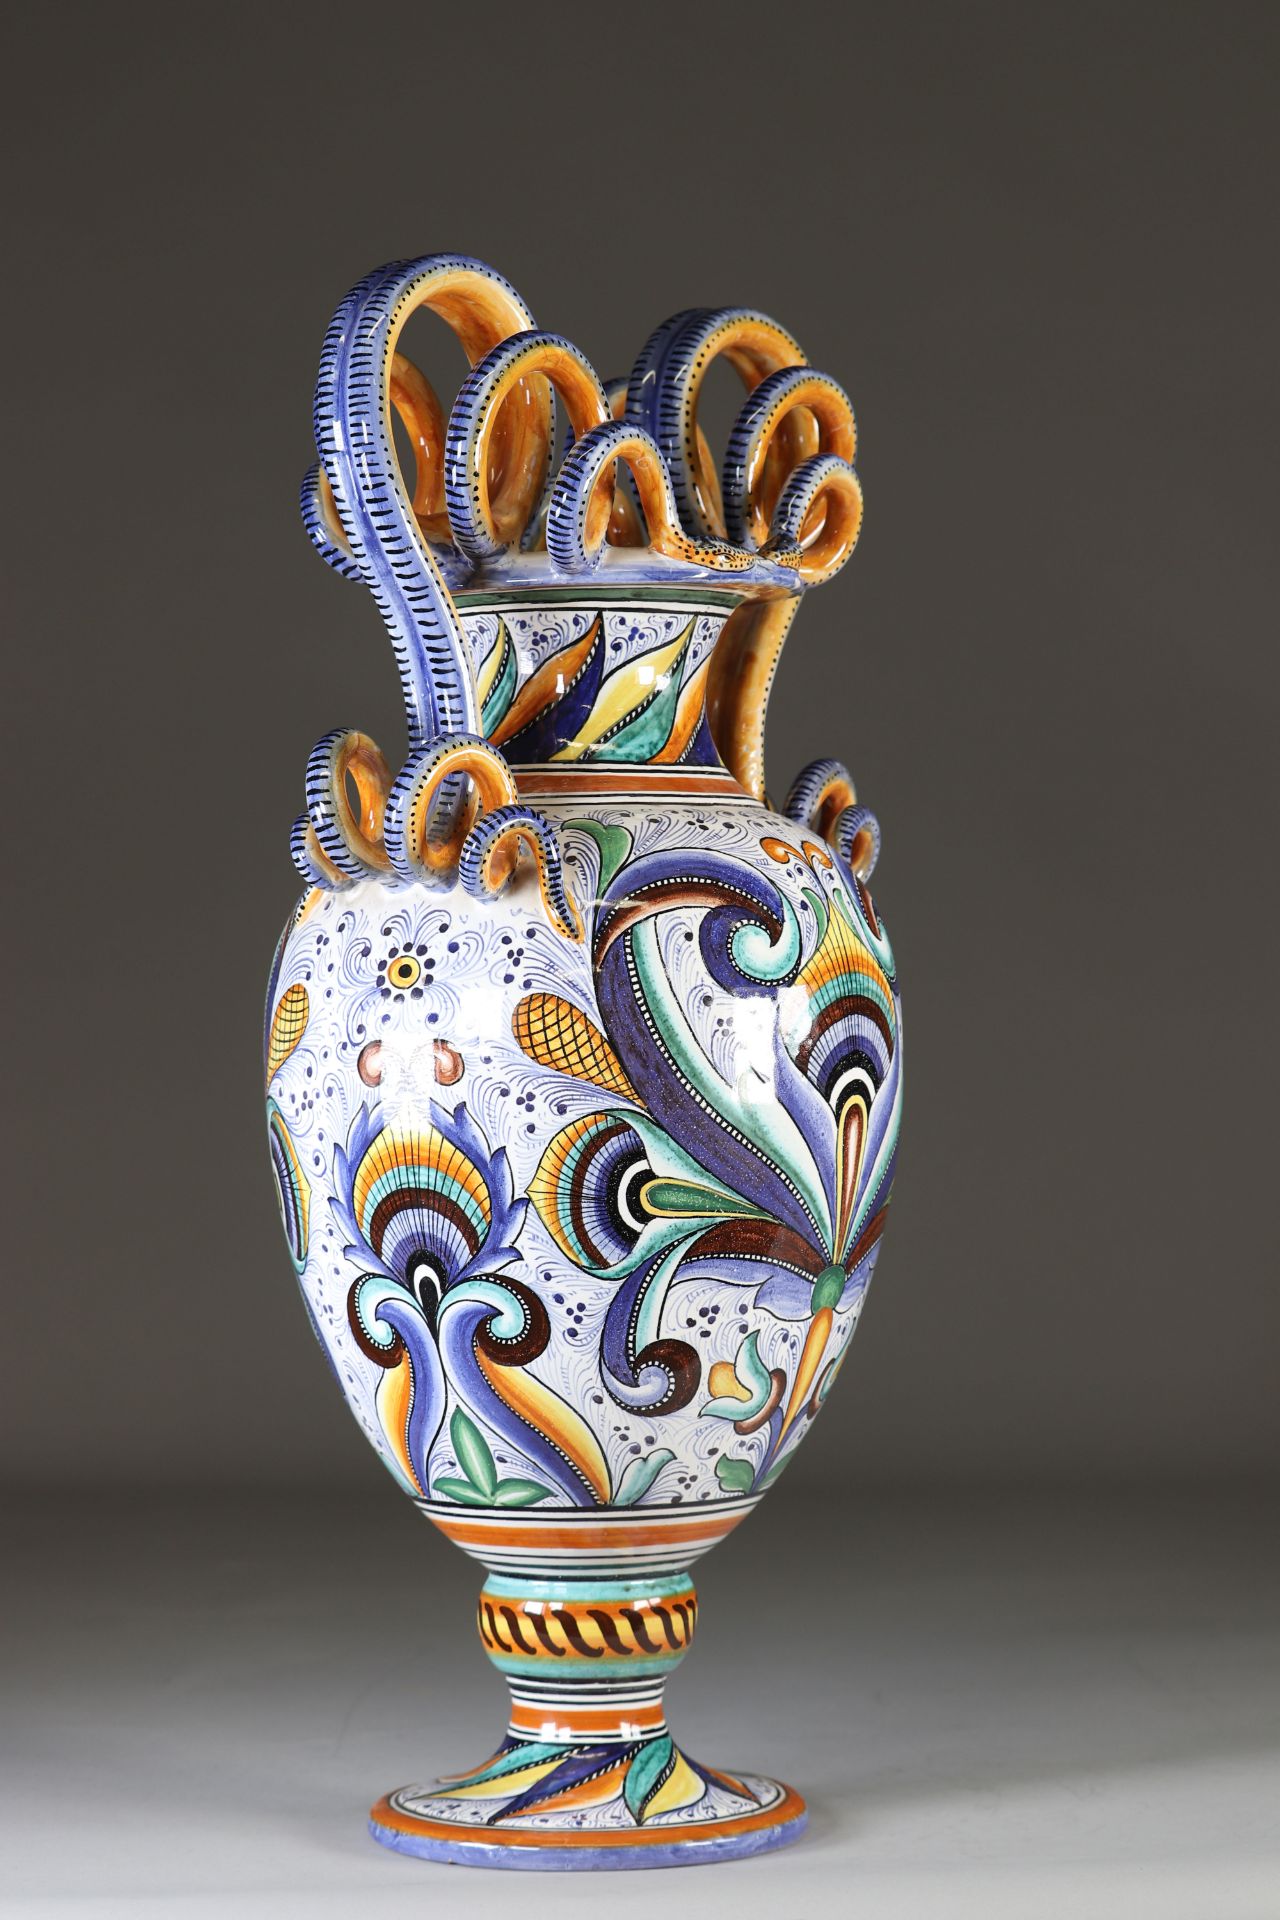 Large vase on pedestal with handles formed of majolica-style earthenware snakes - Image 2 of 4